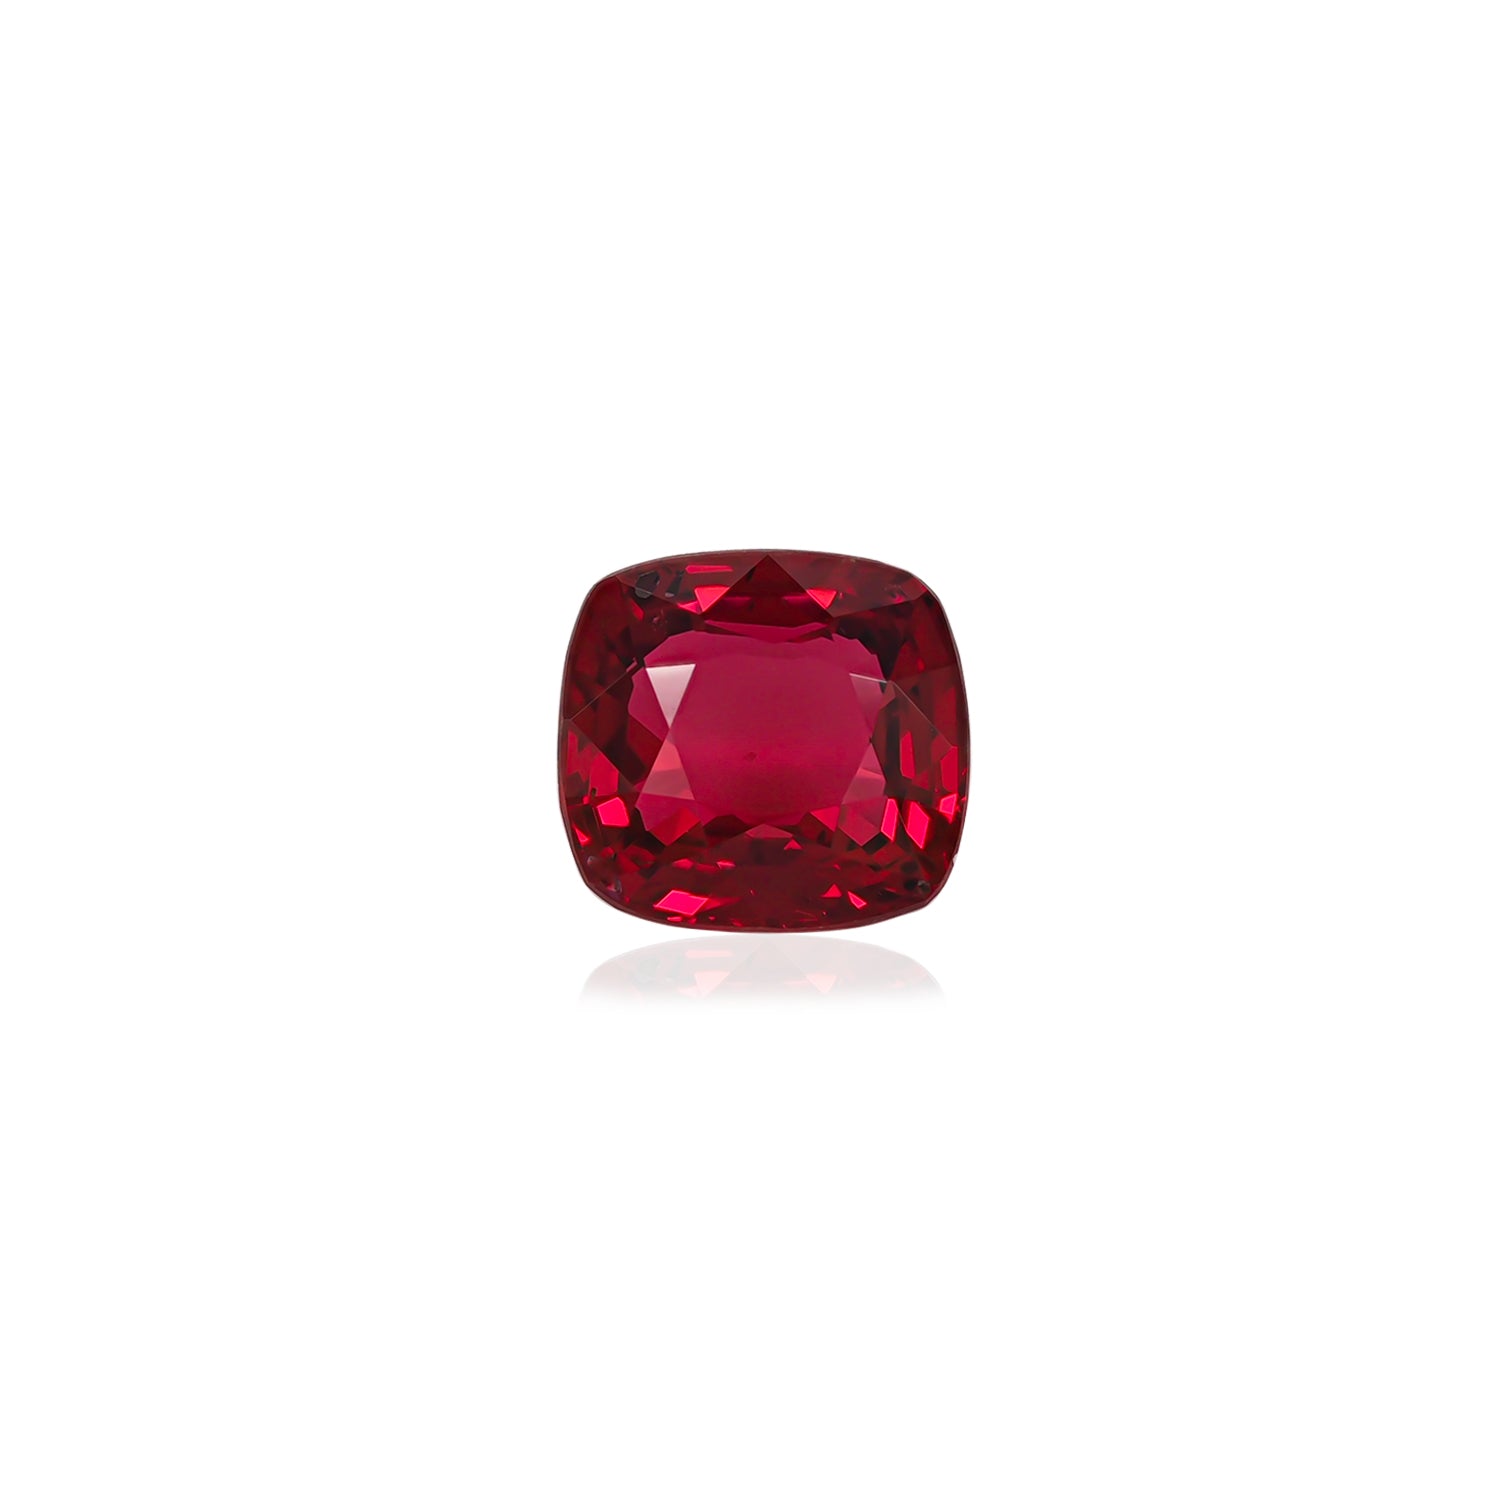 Cherry Red Spinel 1.95 CT